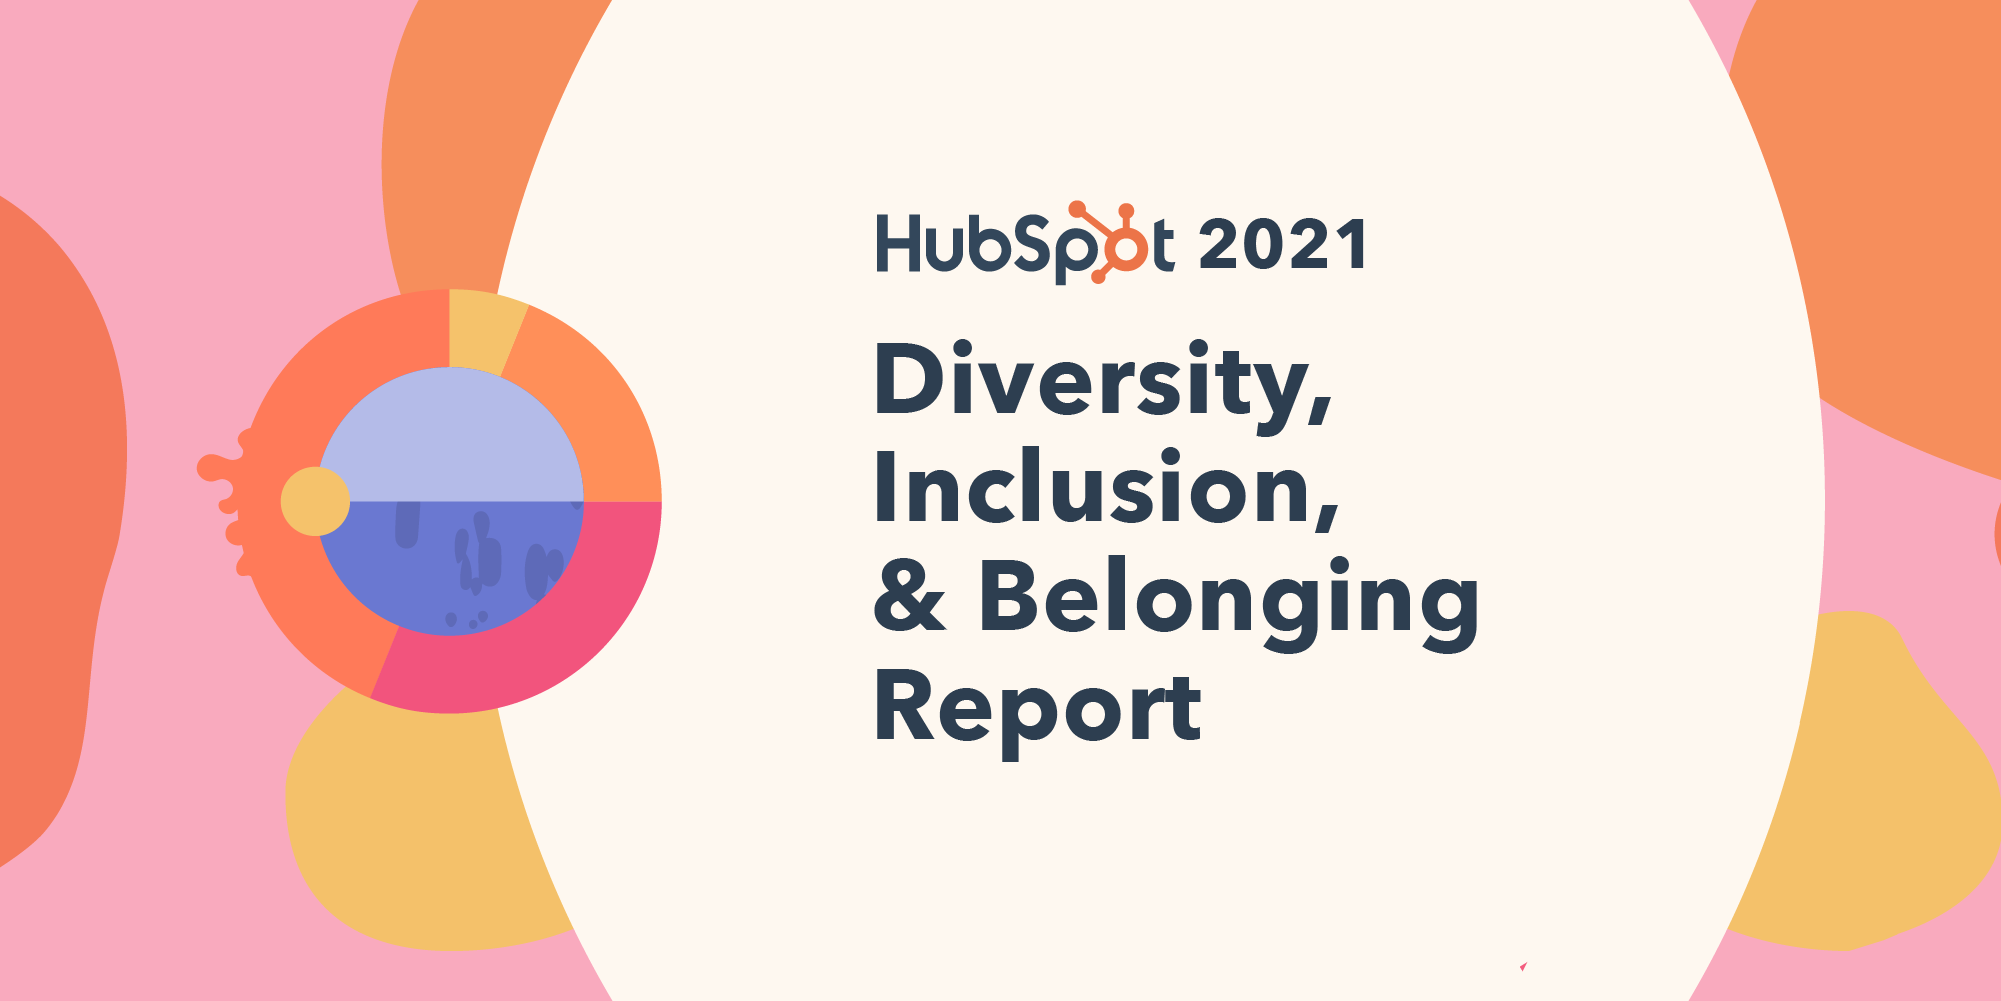 HubSpot Releases 5th Annual Diversity, Inclusion, & Belonging Report, With a Focus on Driving Lasting Change